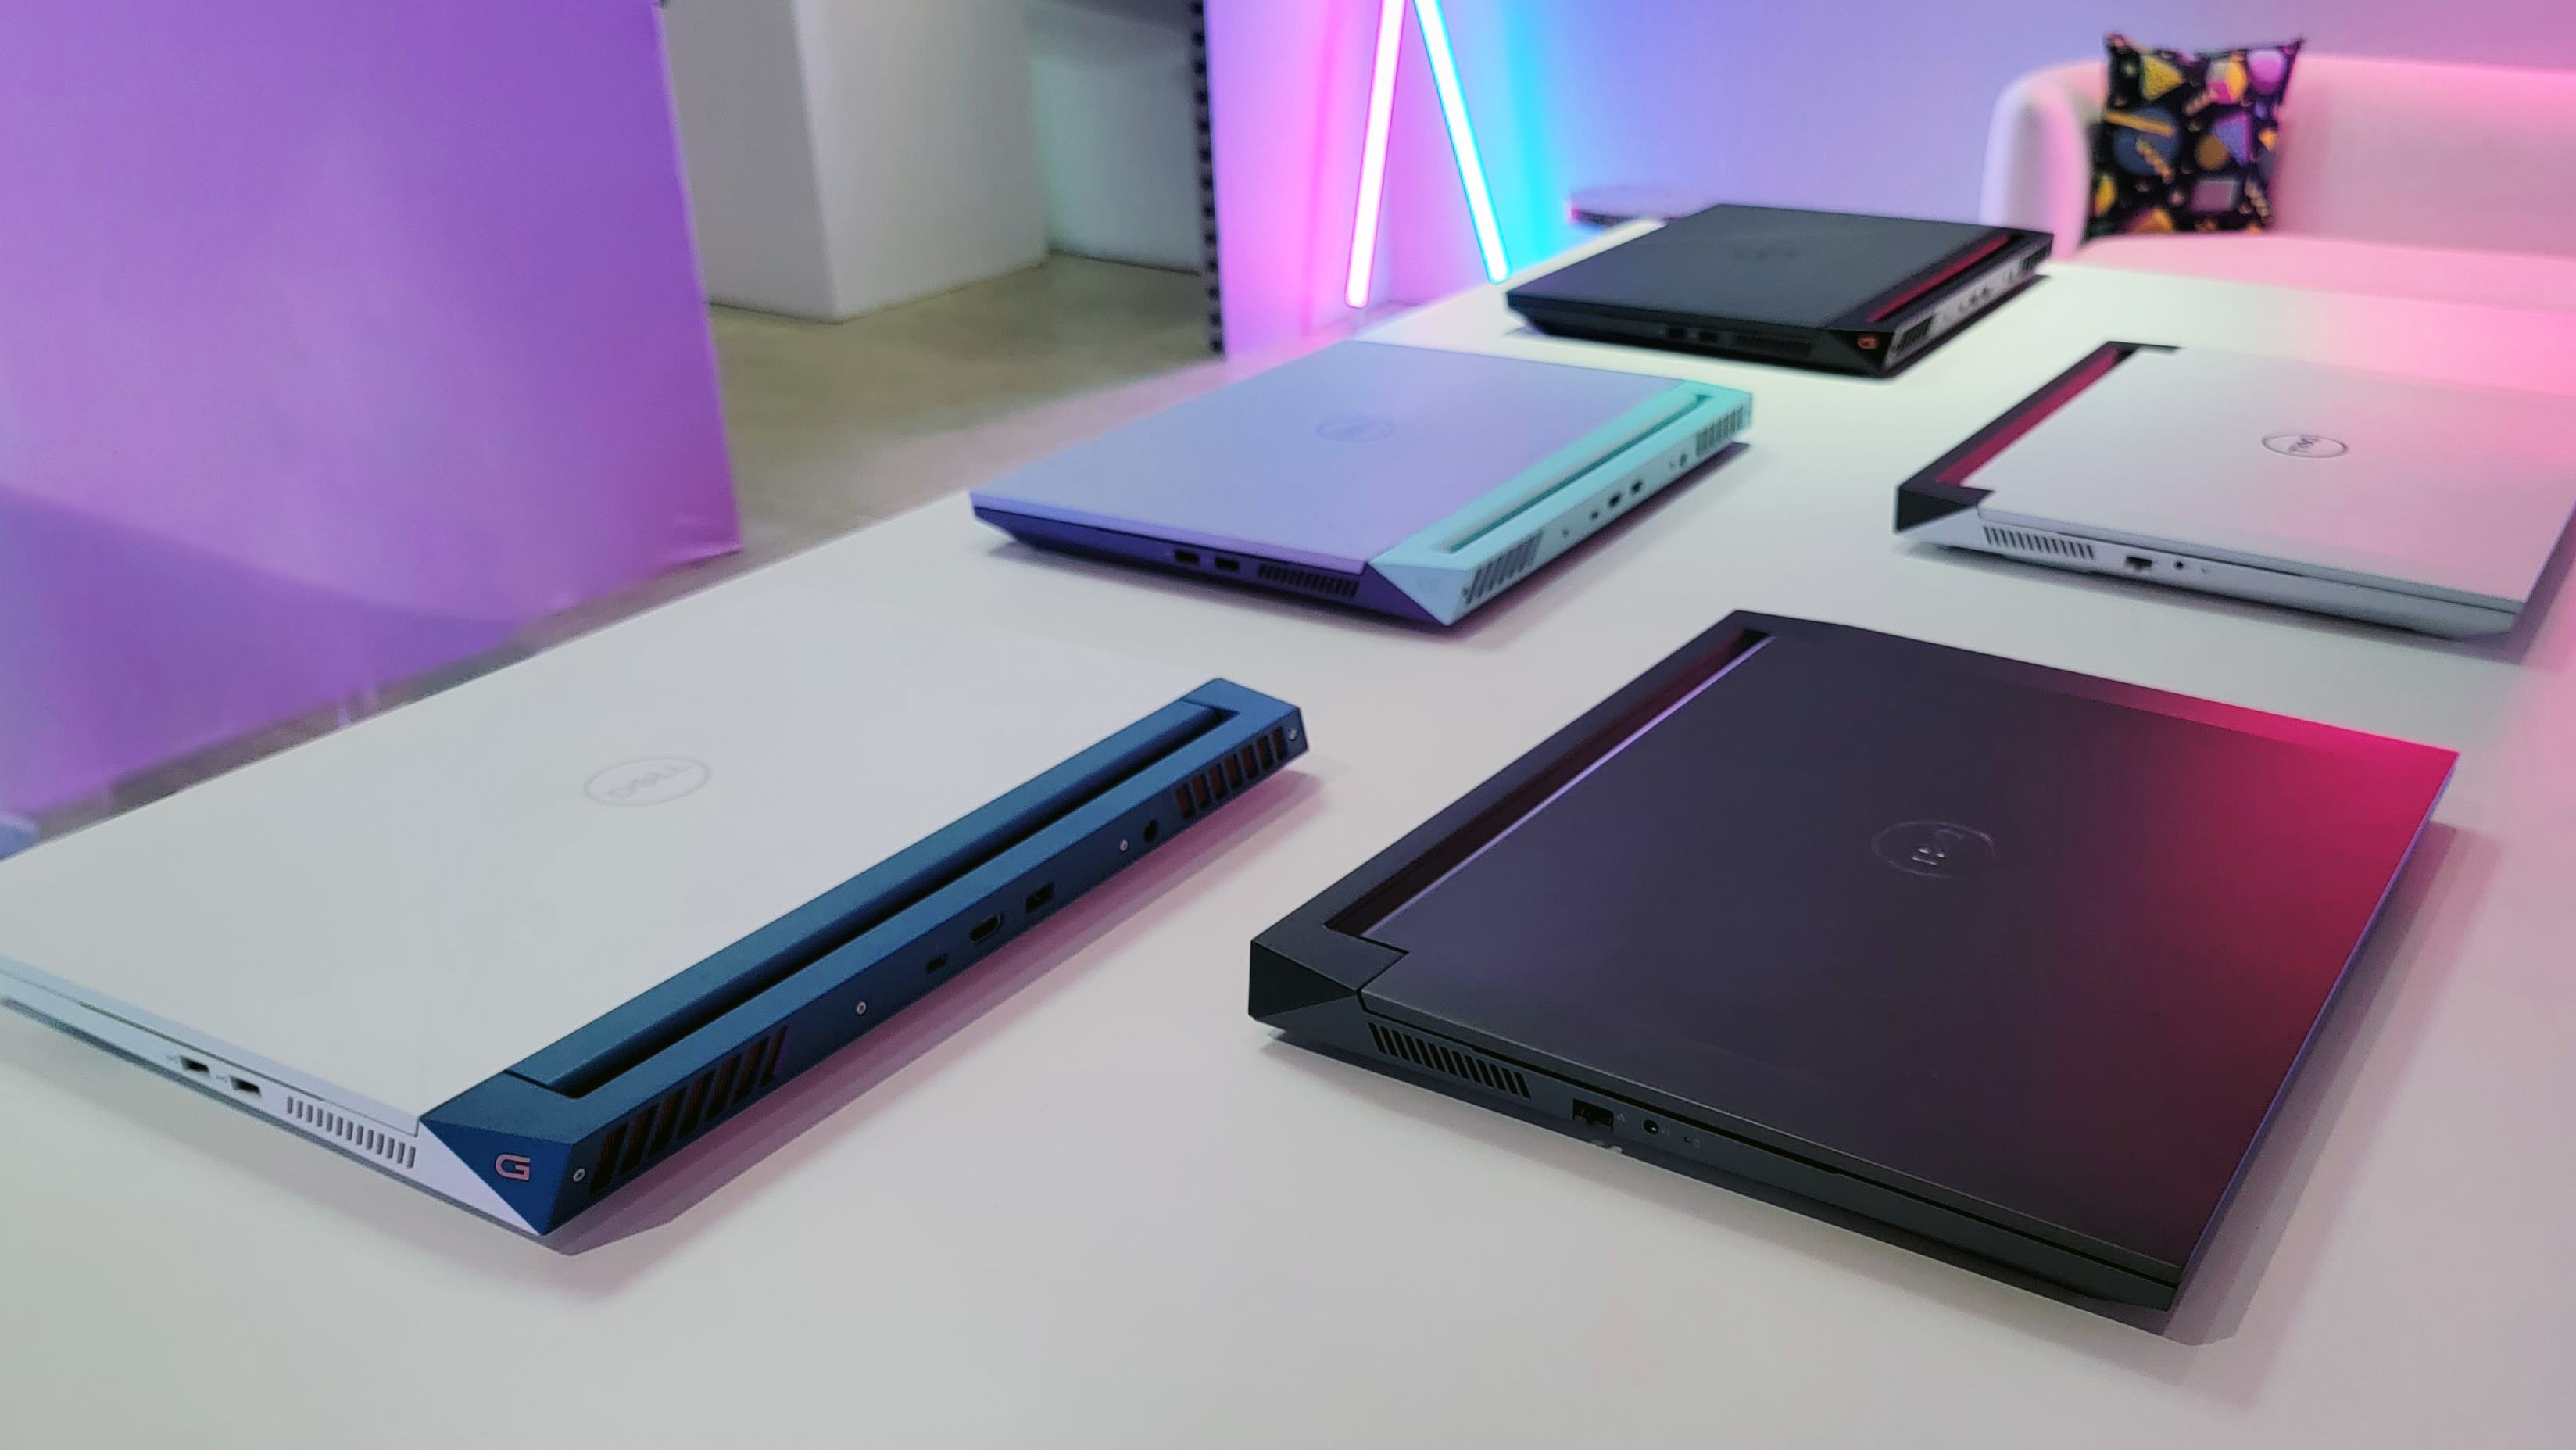 CES 2023 Blog: Latest PC Hardware News from the Show Floor